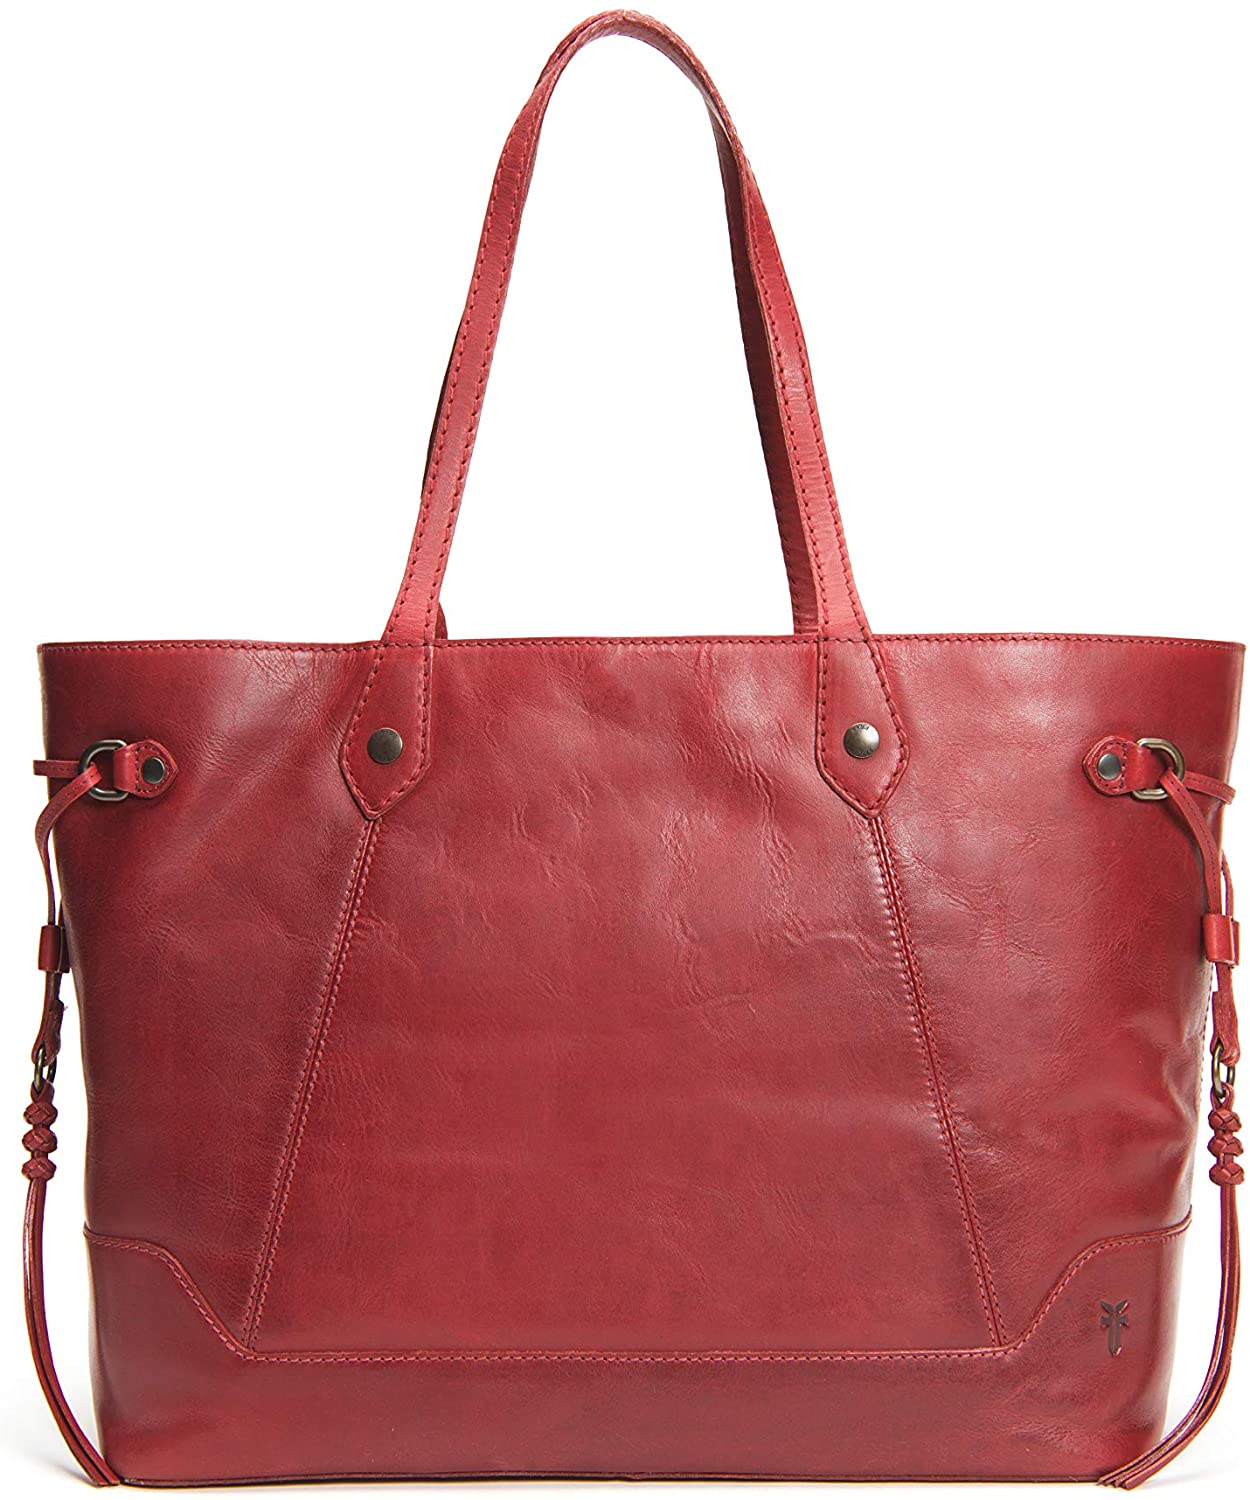 Frye Stitch Leather Tote Bag in Brown | Lyst